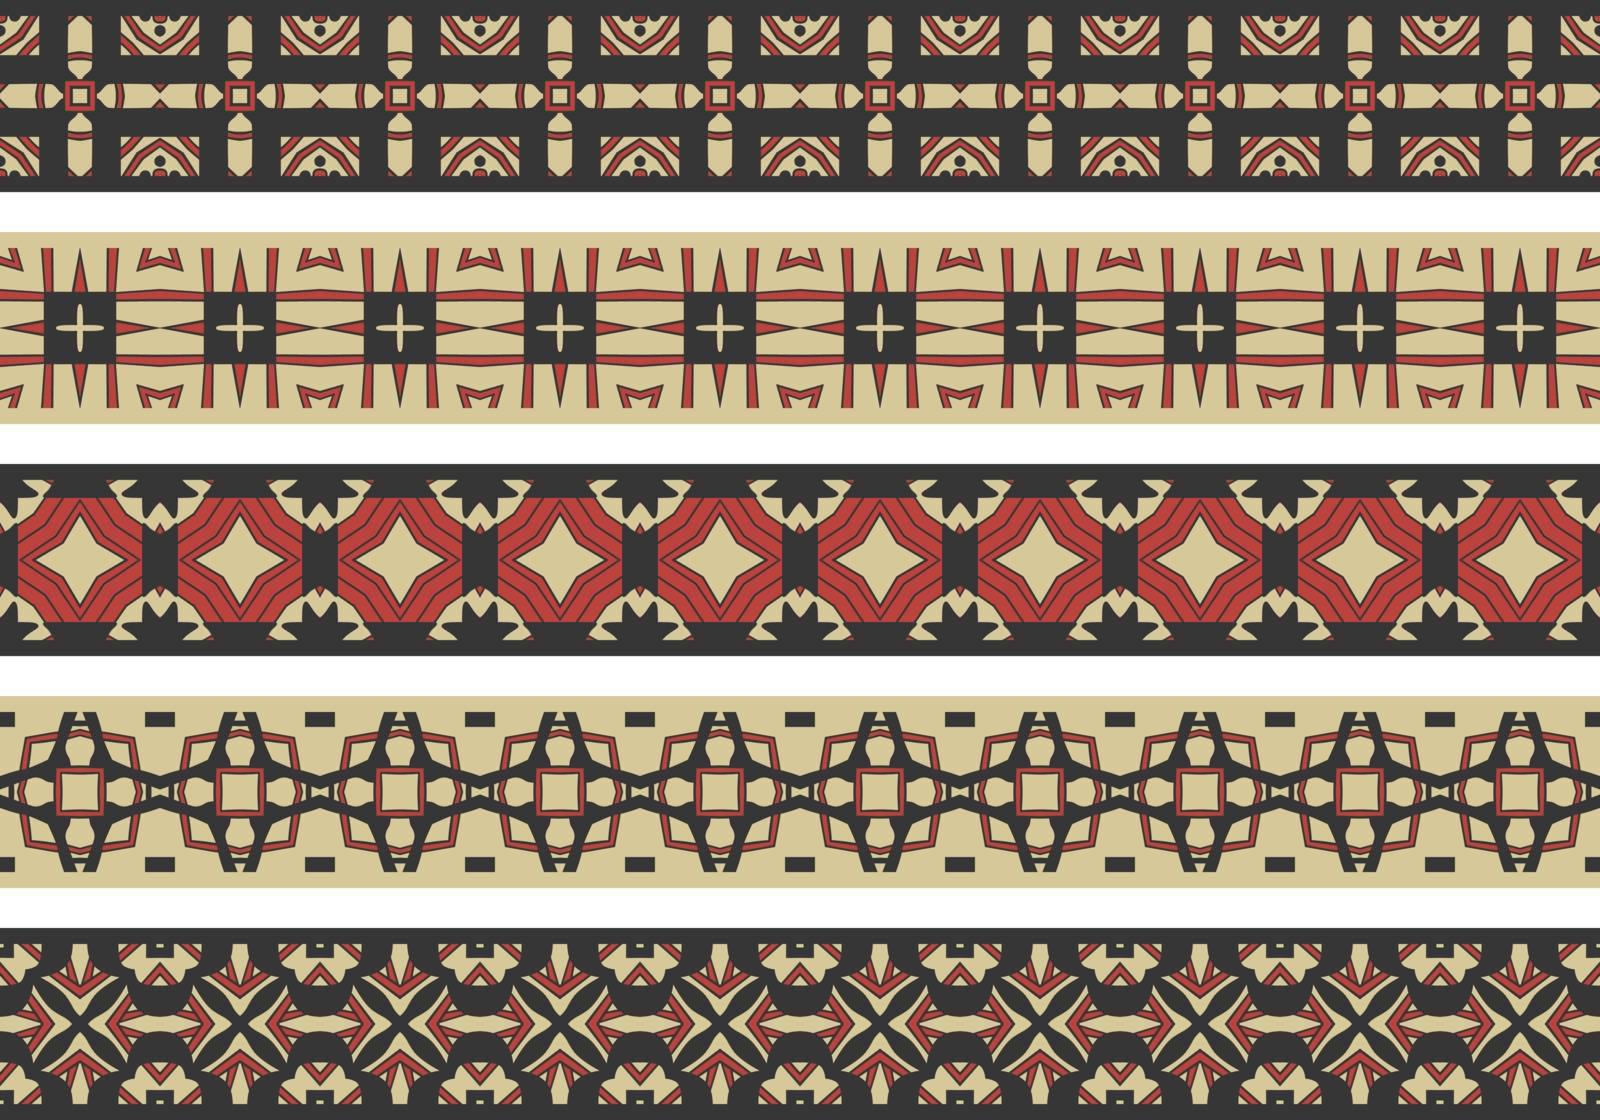 Set of five illustrated decorative borders made of abstract elements in beige, red and black